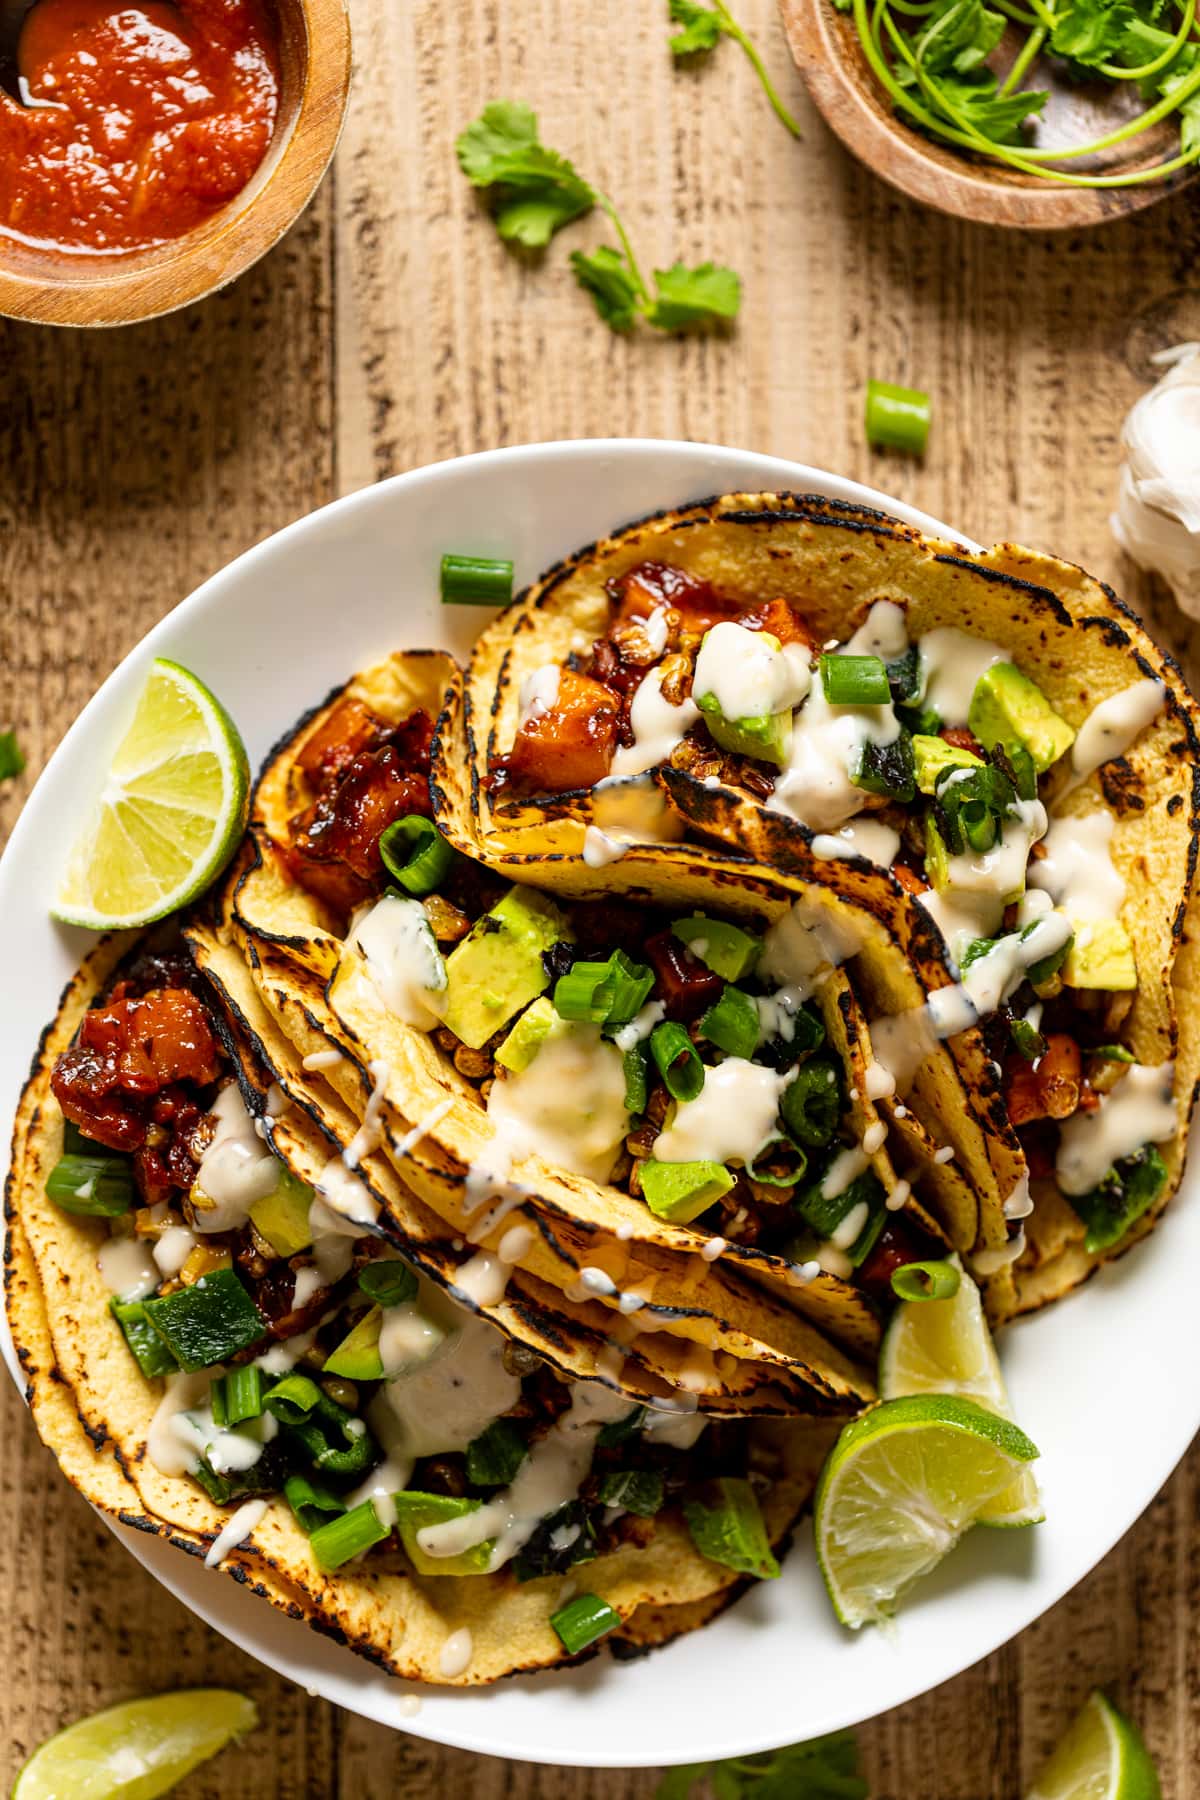 Chipotle BBQ Butternut Squash Tacos drizzled with dairy-free garlic lime sauce